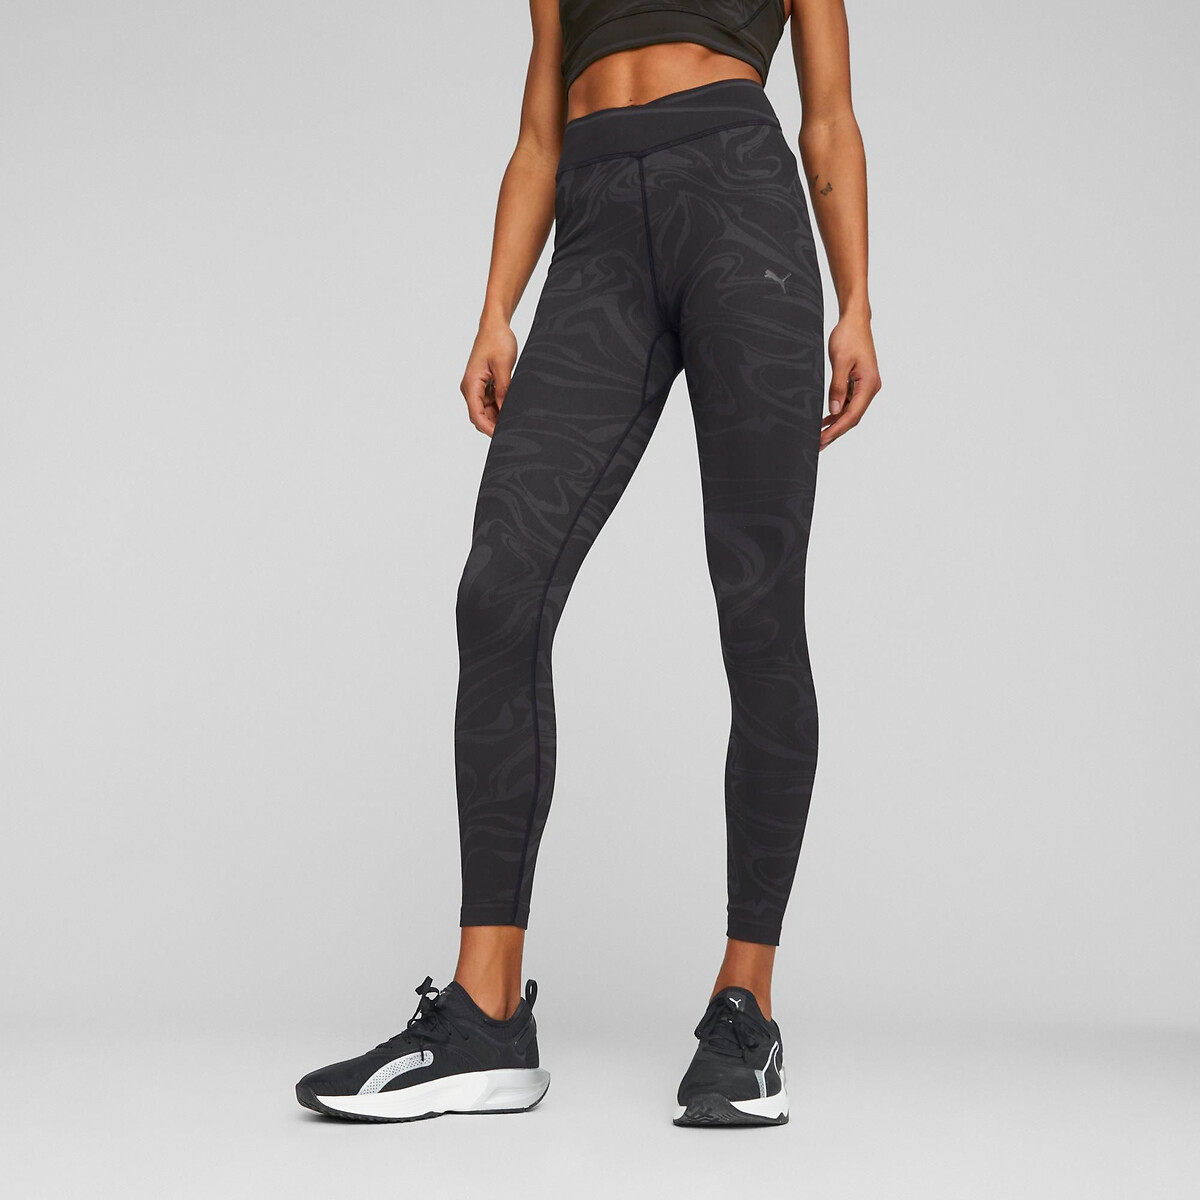 Seamless Sports Leggings in All-Over Print